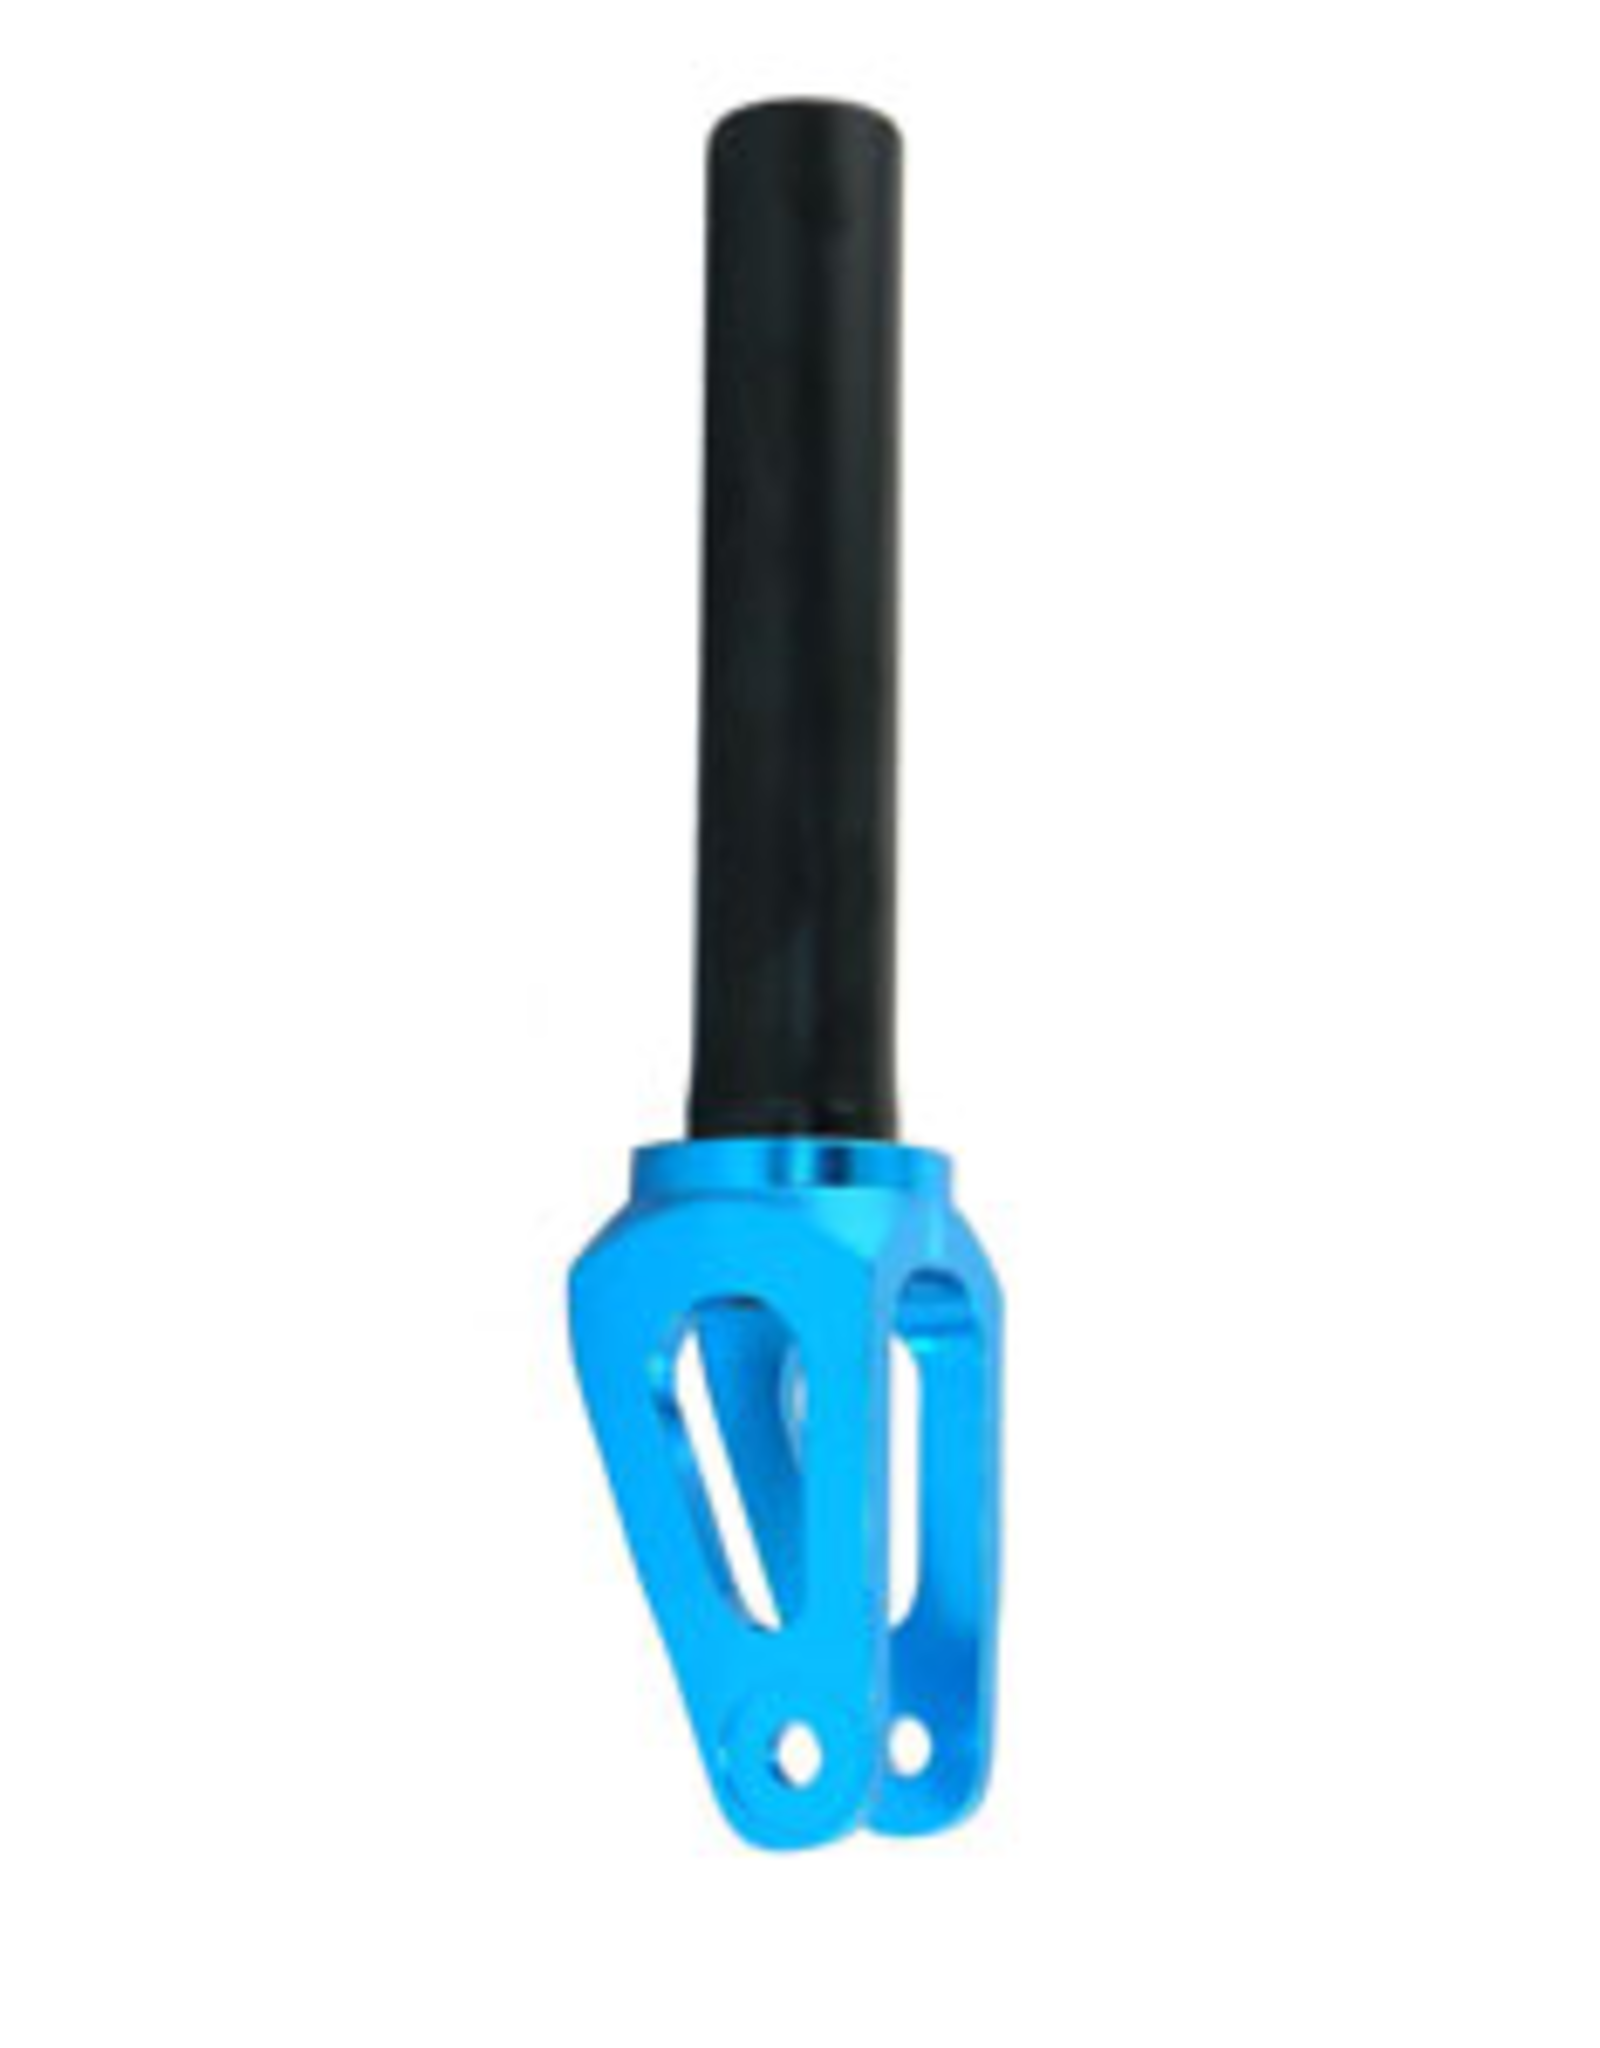 BULLETPROOF PART ALLOY CNC 150MM THREADLESS FORK ANODIZED BLUE SCOOTER